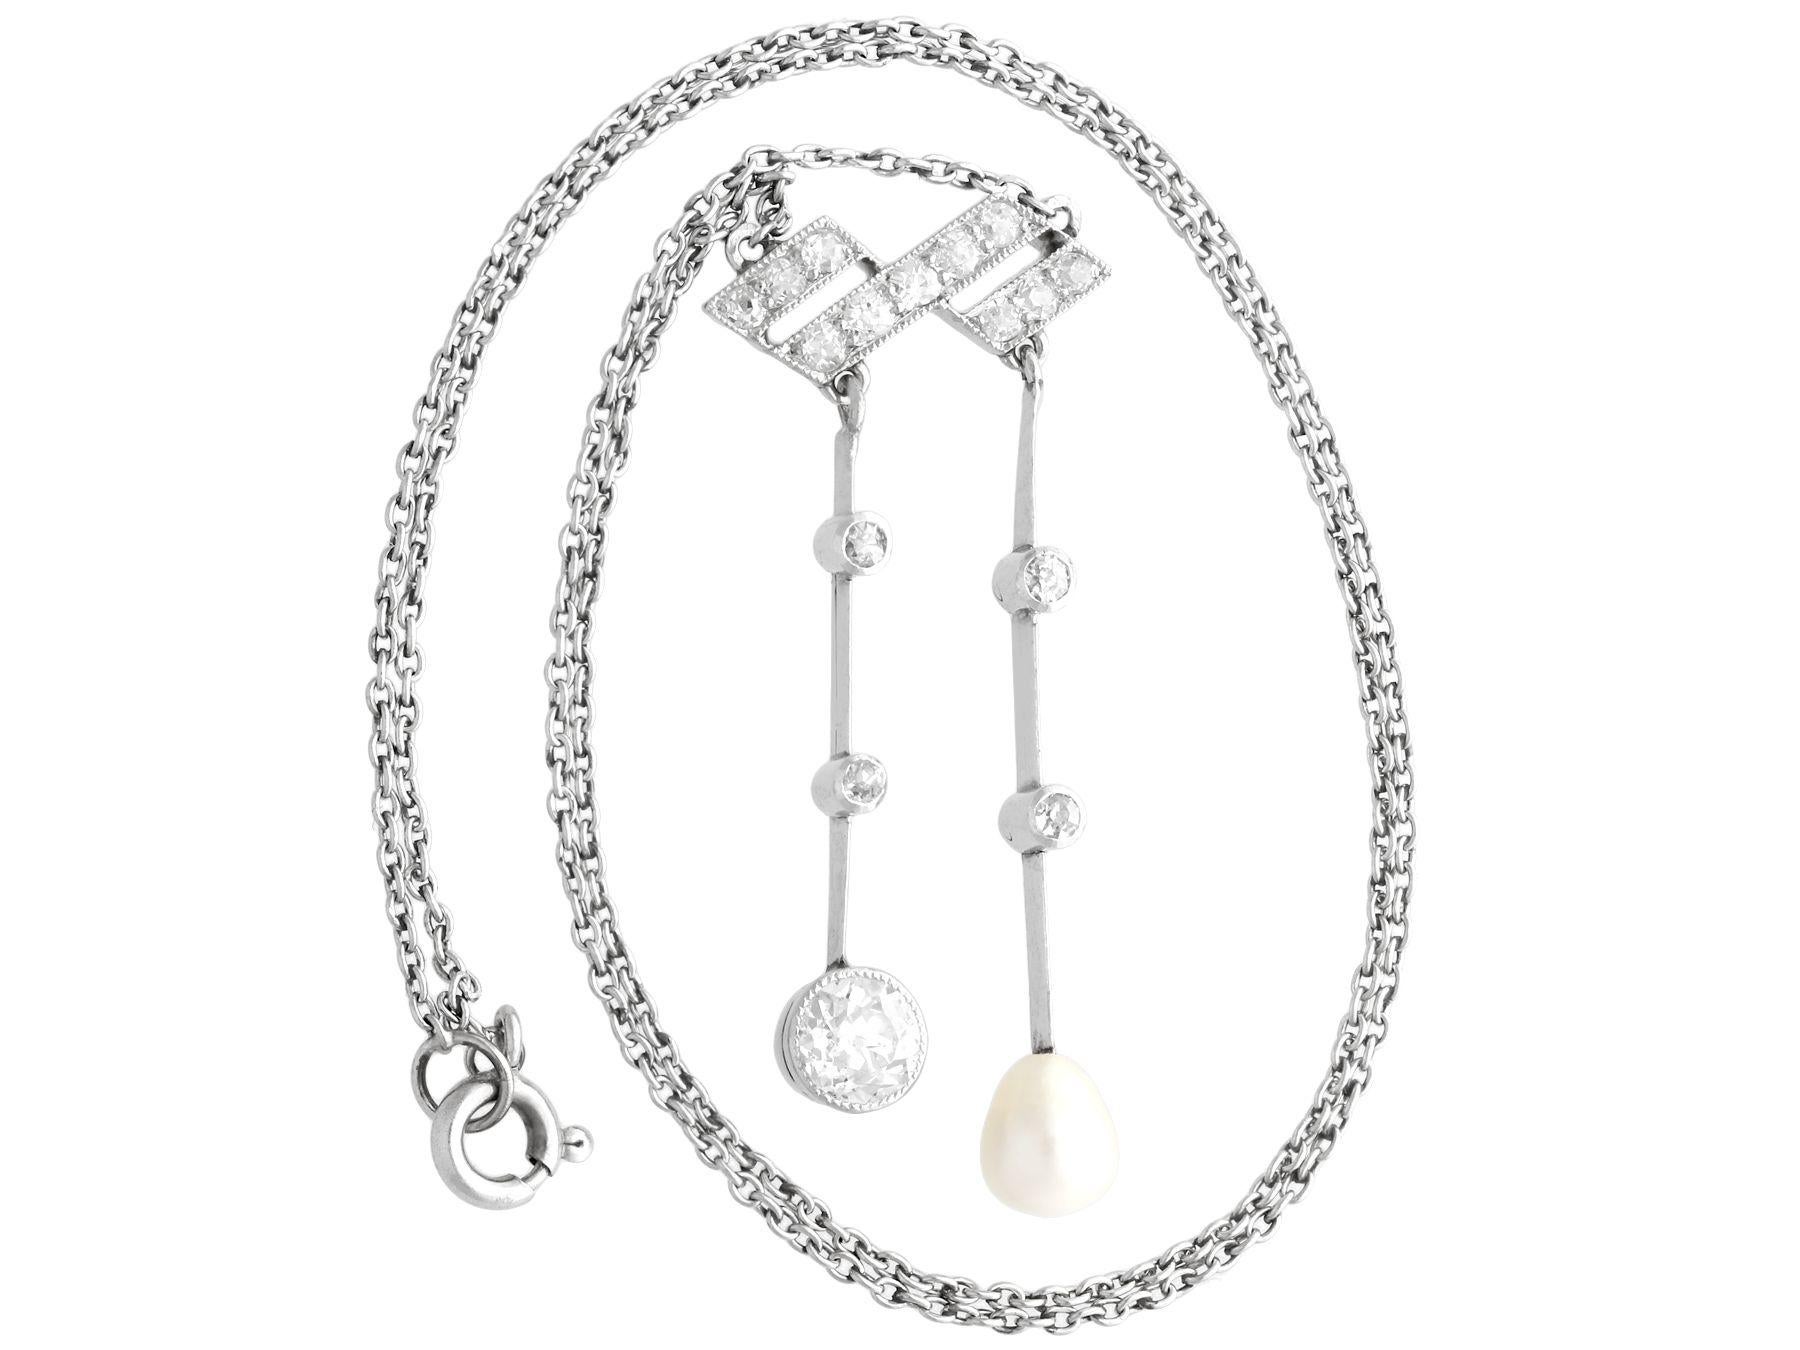 A fine and impressive antique pearl, 1.12 carat diamond and platinum drop necklace; part of our diverse antique jewelry and estate jewelry collections.

This fine and impressive pearl and diamond drop necklace has been crafted in platinum.

The